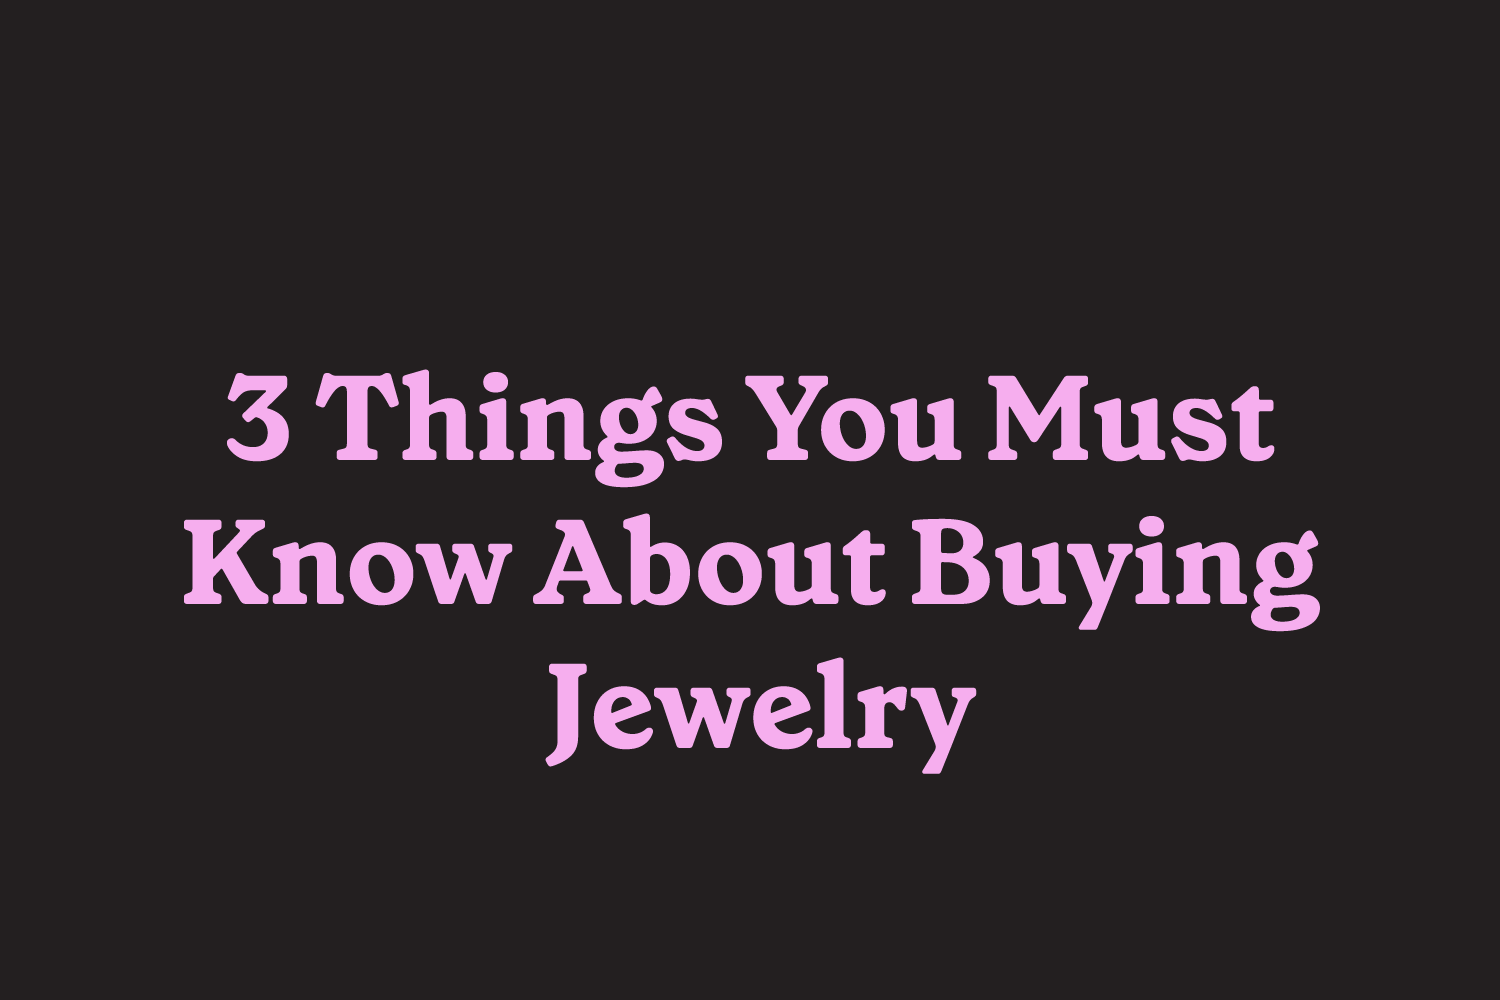 3 Things You Must Know About Buying Jewelry: From a Jewelry Expert (Part 3)